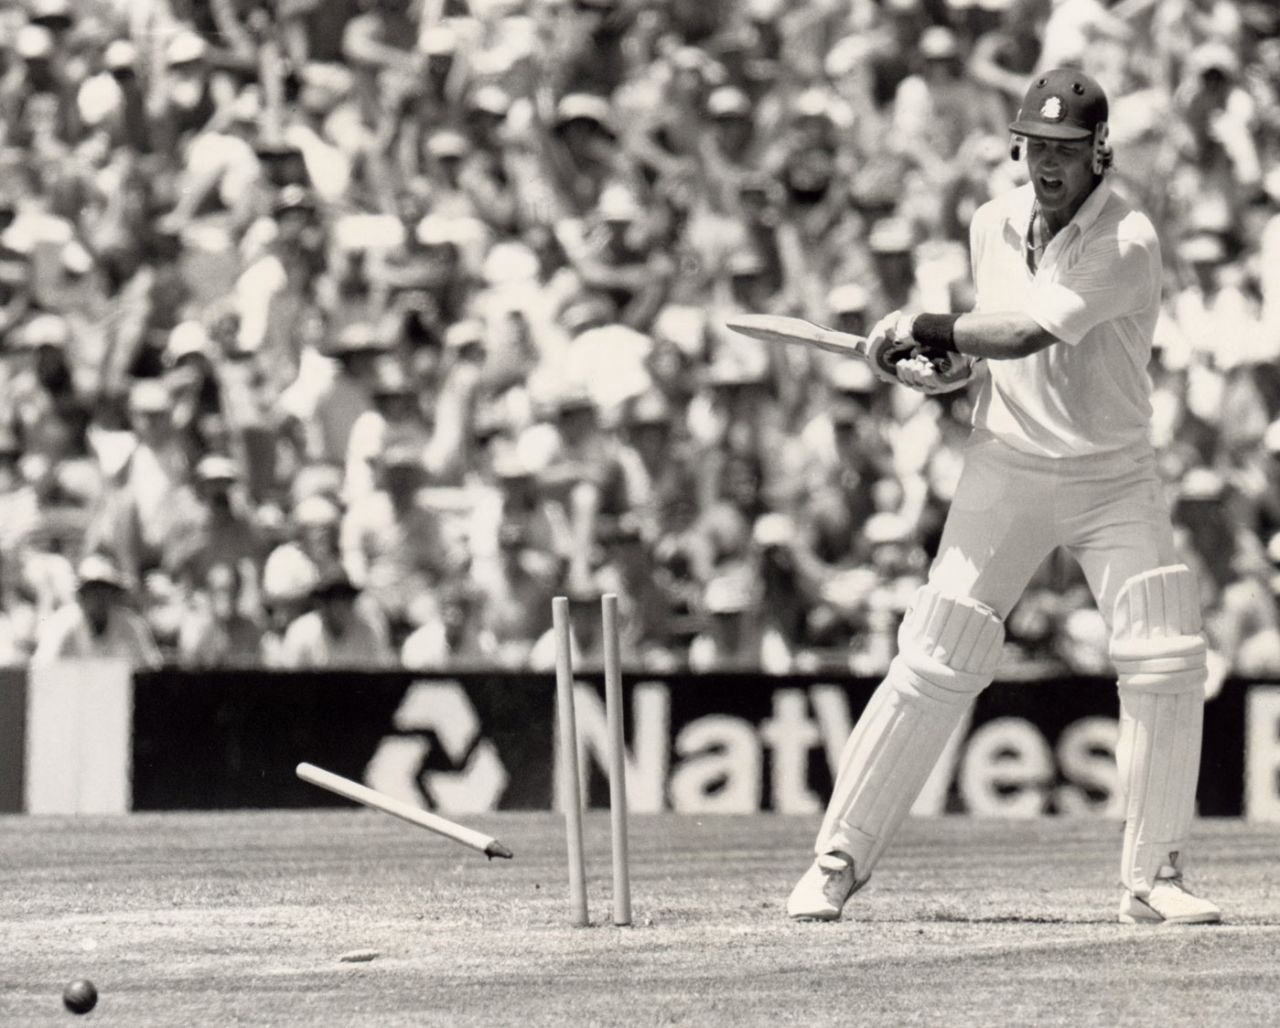 Chris Broad smashes over his stumps after being bowled, Australia v England,  Bicentenary Test, SCG, January 30, 1988
